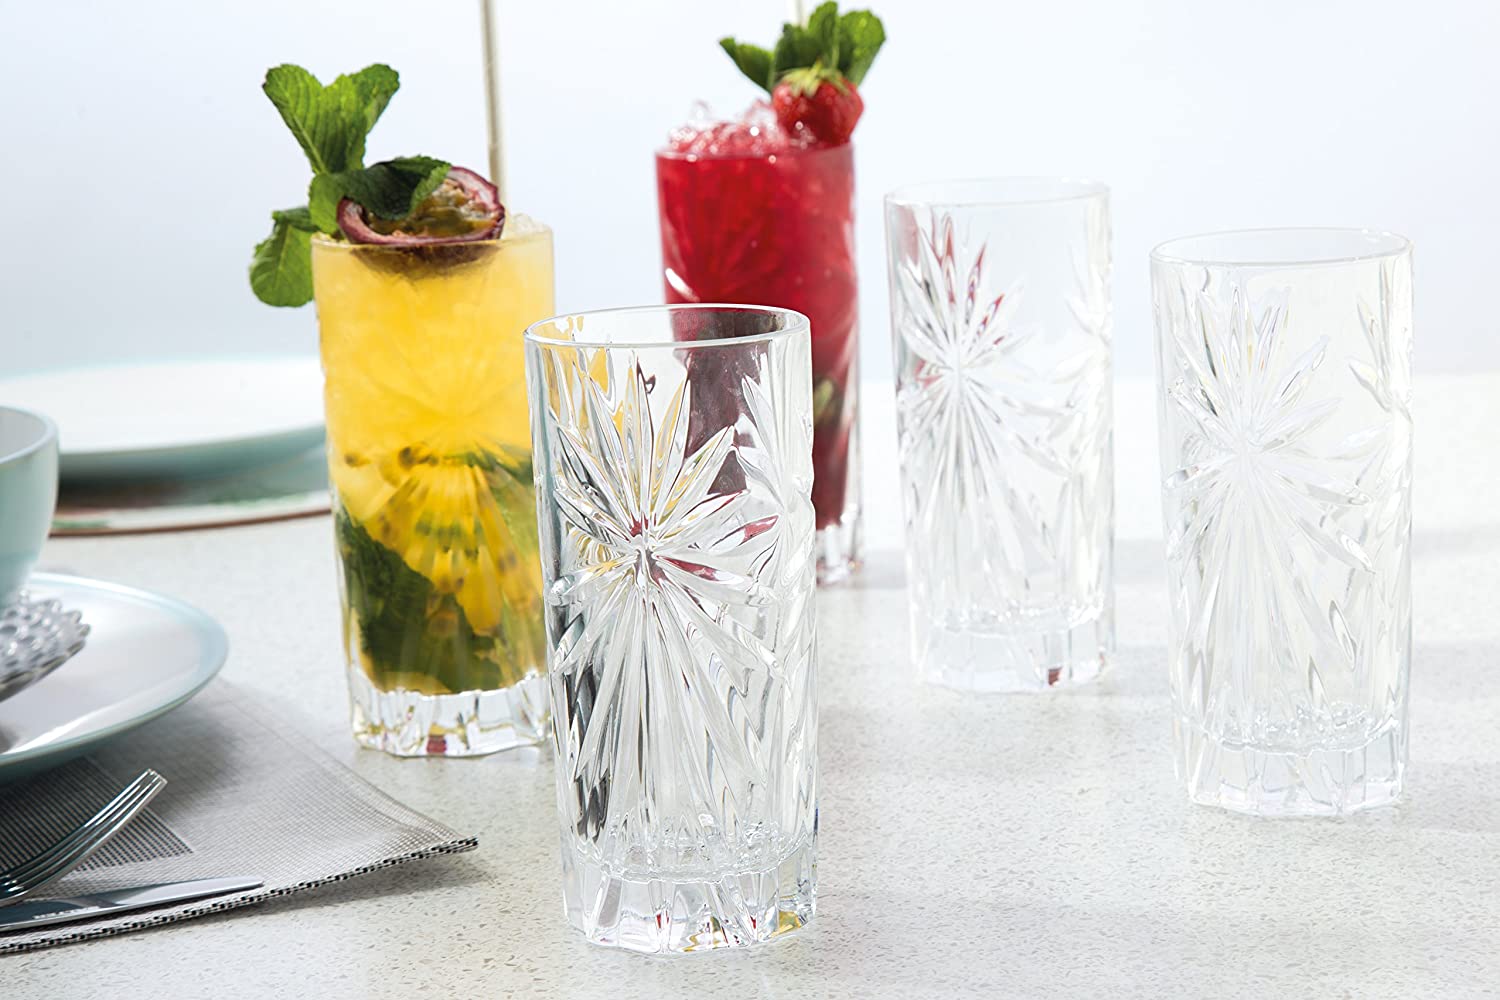 RCR (Made in Italy) Oasis Crystal Long drink cocktail Tumblers Glasses, 360 ml, Set of 6